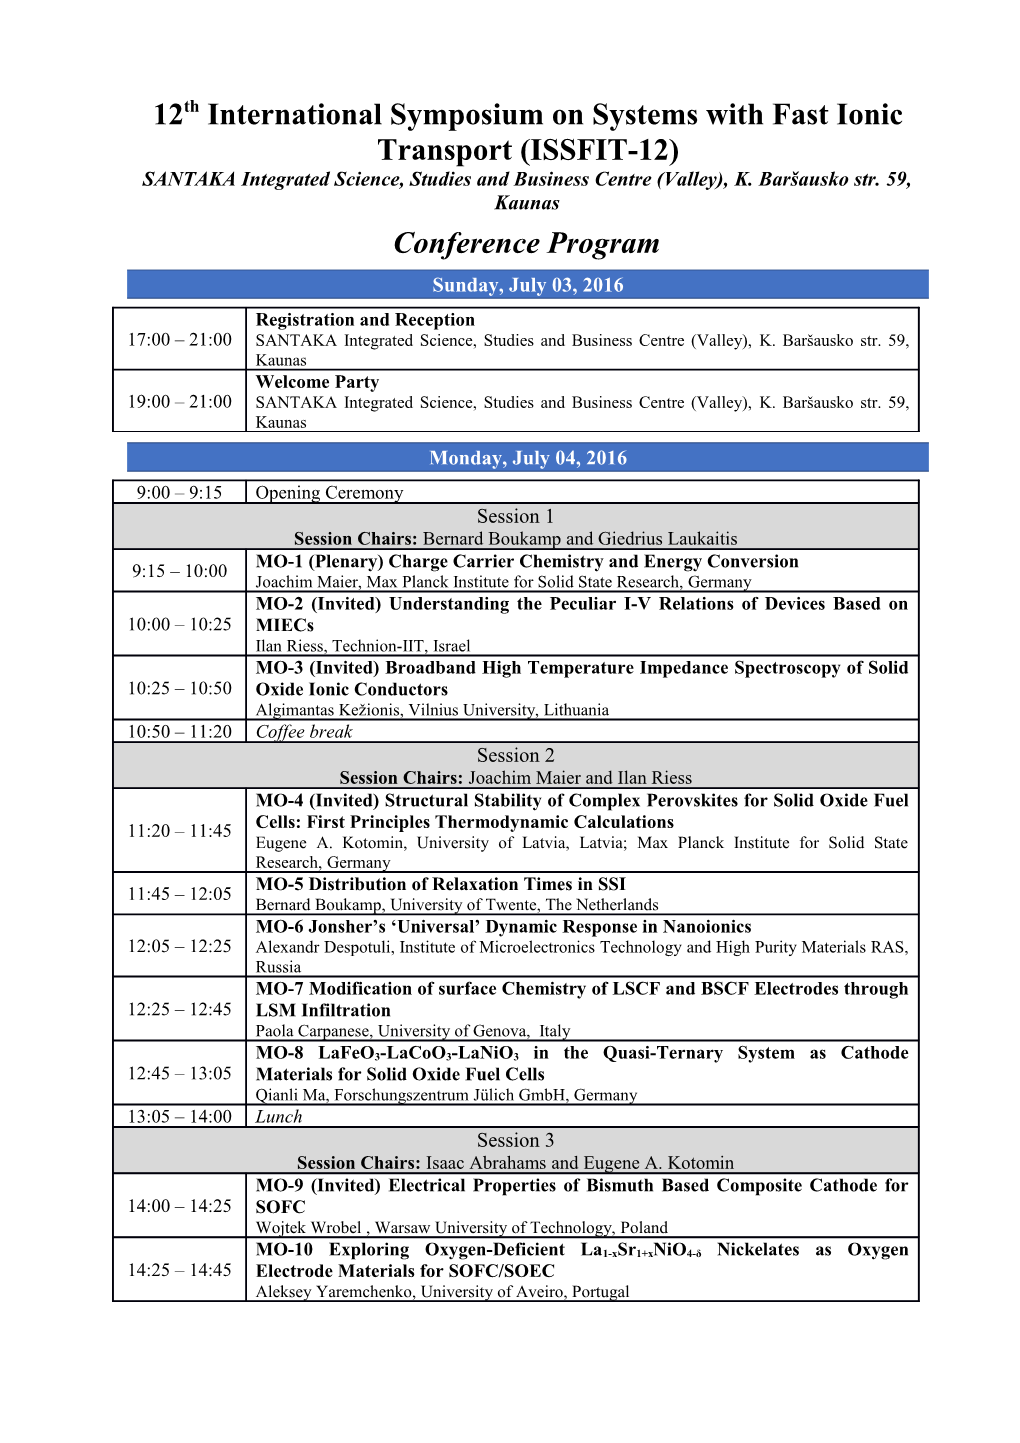 ISSFIT-12 Conference Programmme